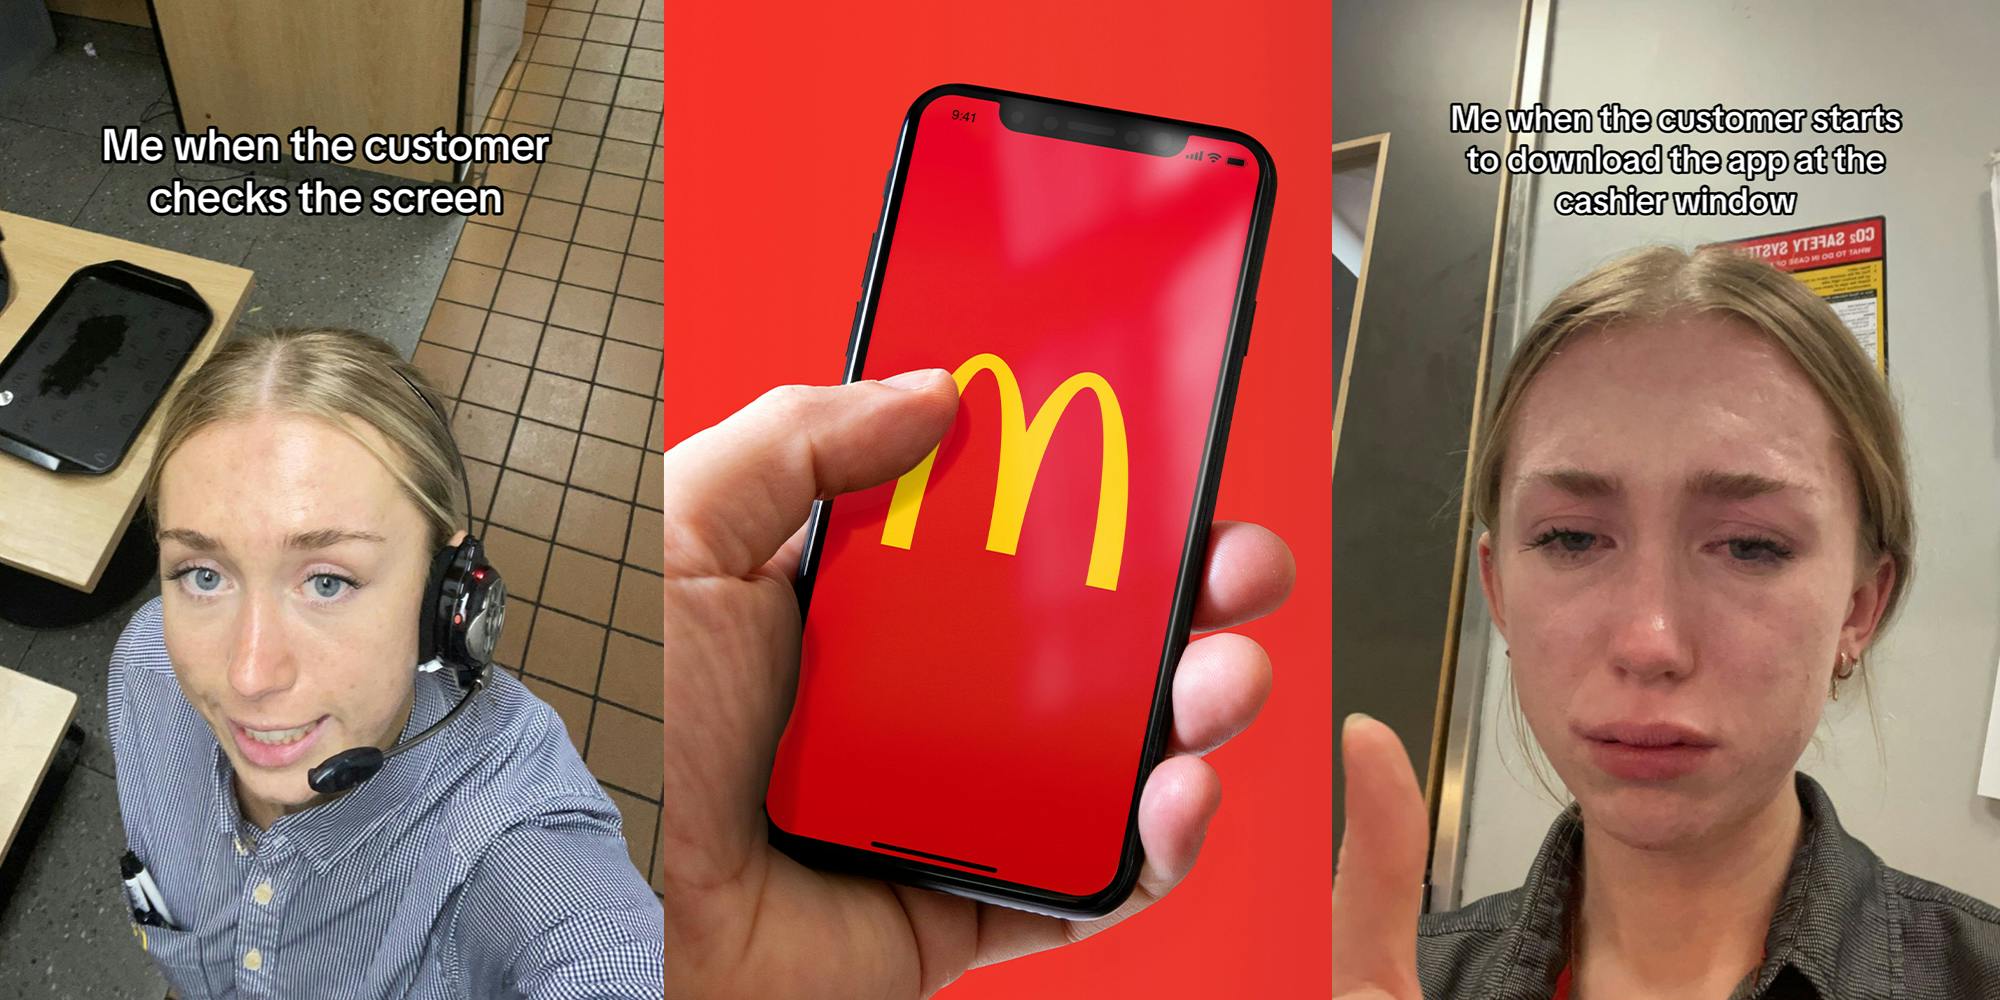 McDonald's worker calls out customers who wait to download the app until they're at the drive-thru window